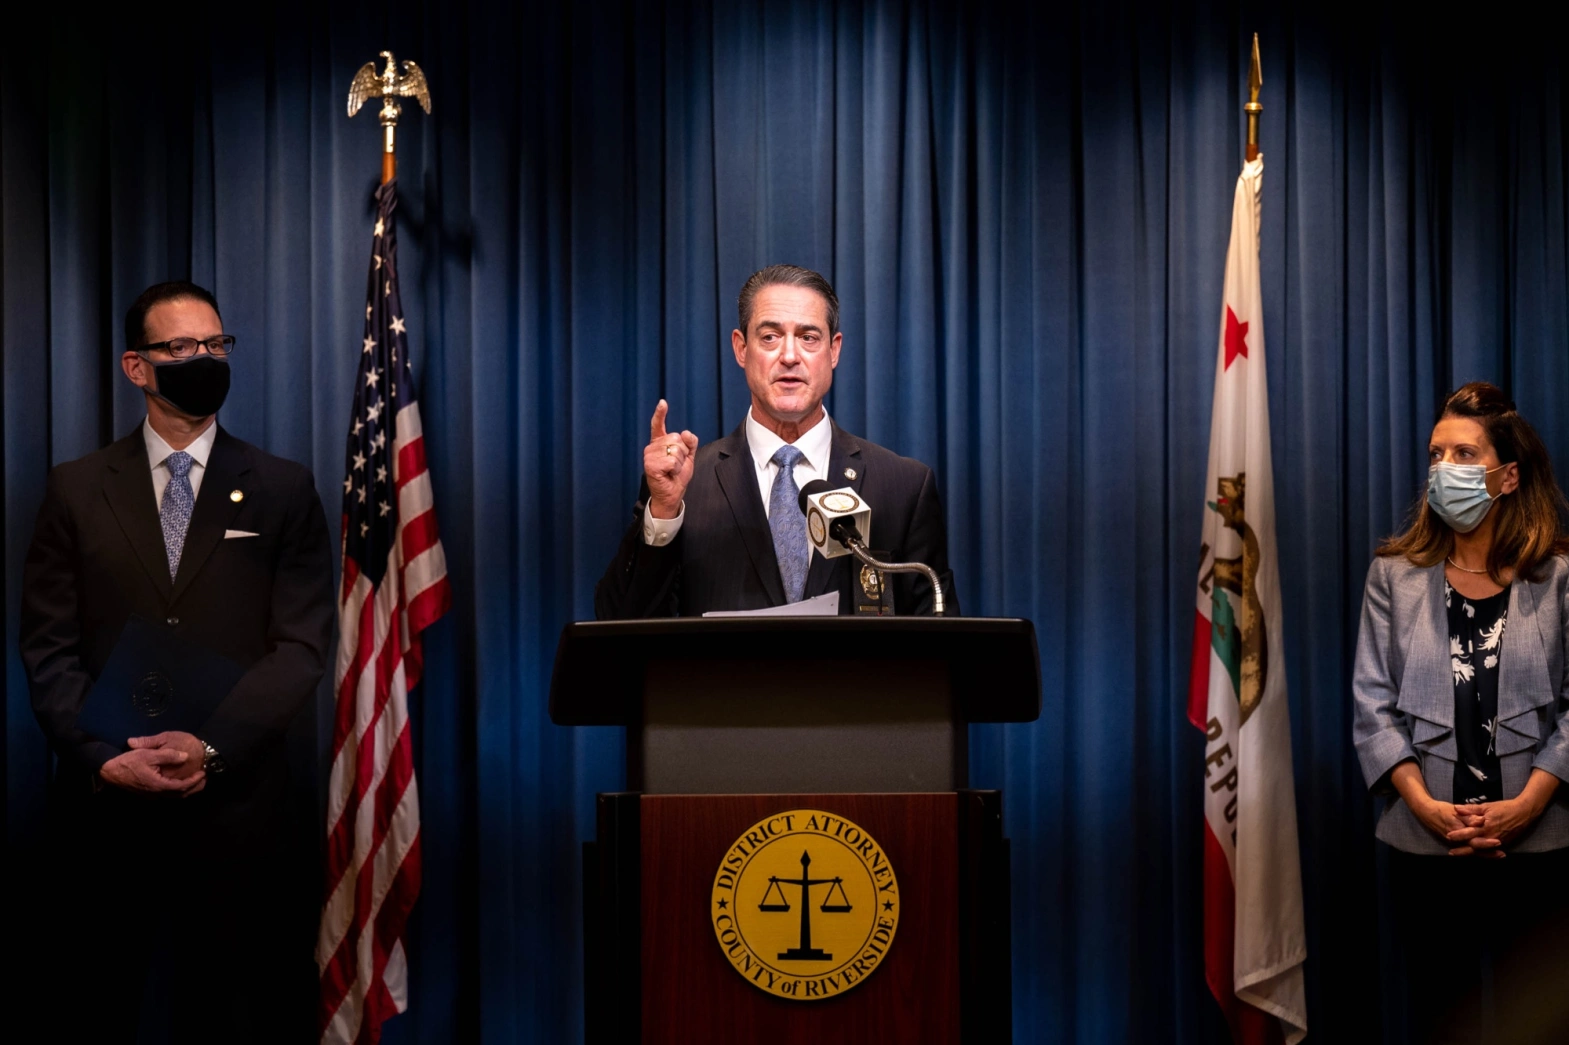 Orange County District Attorney Todd Spitzer speaks during a press conference to promote tougher penalties against fentanyl dealers at the Riverside County District’s Attorney’s Office in Riverside on Wednesday, Jan. 12, 2022. (Photo by Watchara Phomicinda, The Press-Enterprise/SCNG)